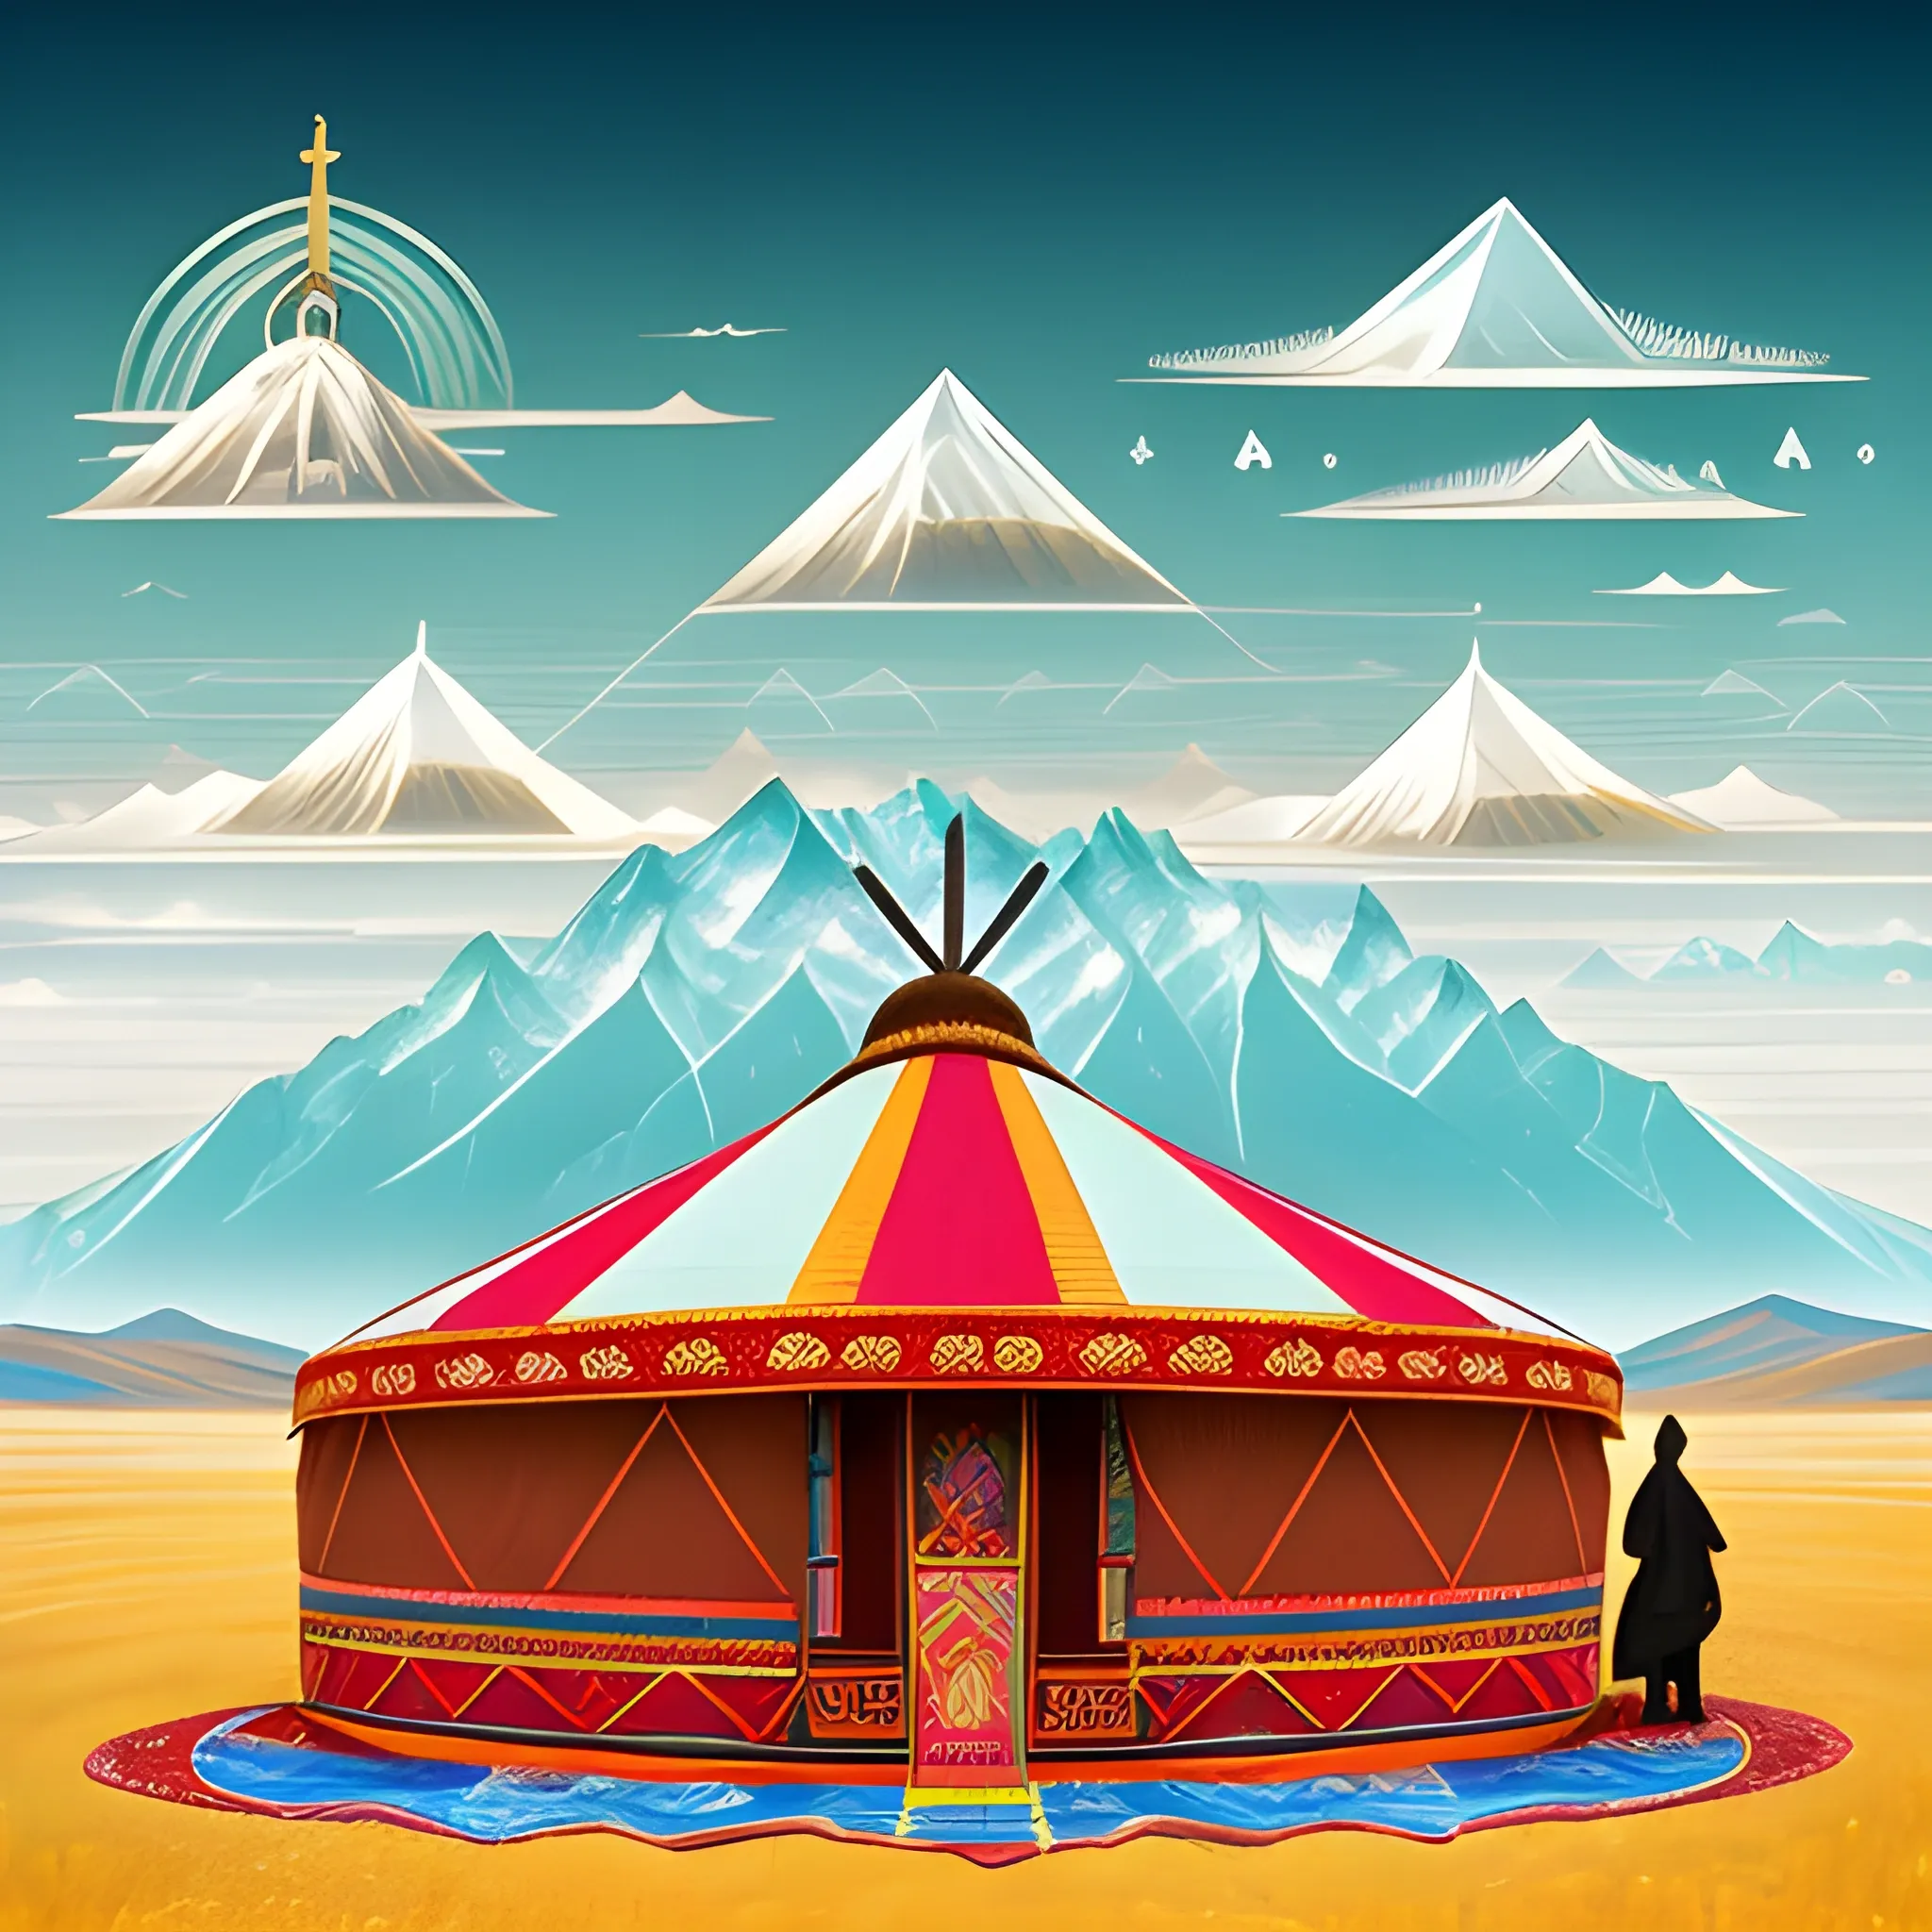 Create an evocative illustration depicting the rich cultural heritage of the Kazakh nomads and their spiritual connection with Tengrianism amidst the vast expanse of the steppe. Include key elements such as traditional yurts, horse-mounted nomads, ancient Tengrian symbols, and rituals. Infuse the artwork with a sense of unity between the nomadic lifestyle and the natural landscape, showcasing the spiritual beliefs and customs of the Kazakh people as they embrace their Tengrian roots in the heart of the steppe., Trippy